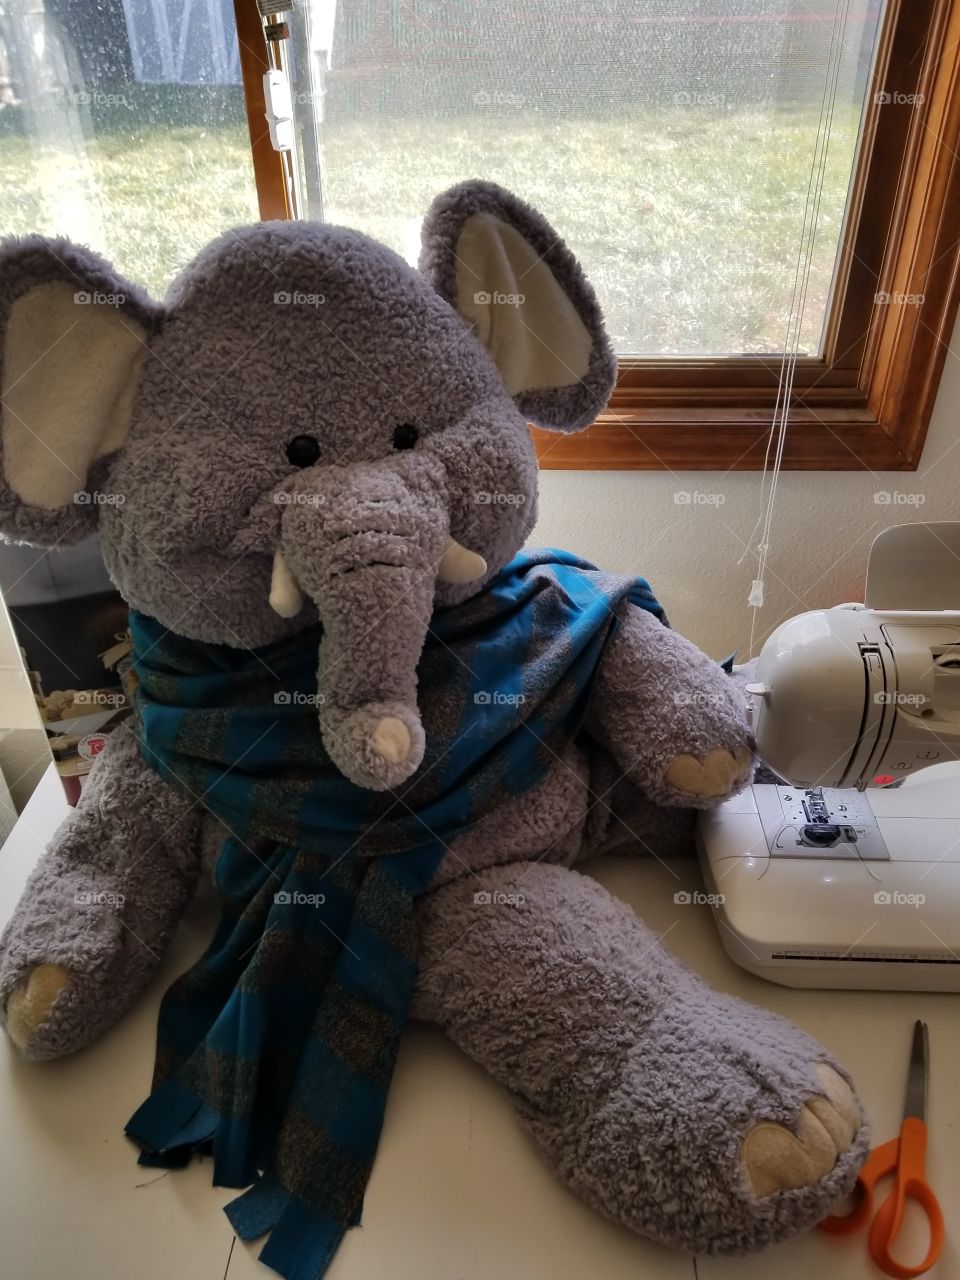 Opie,the elephant..helping with a scarf modeling job!